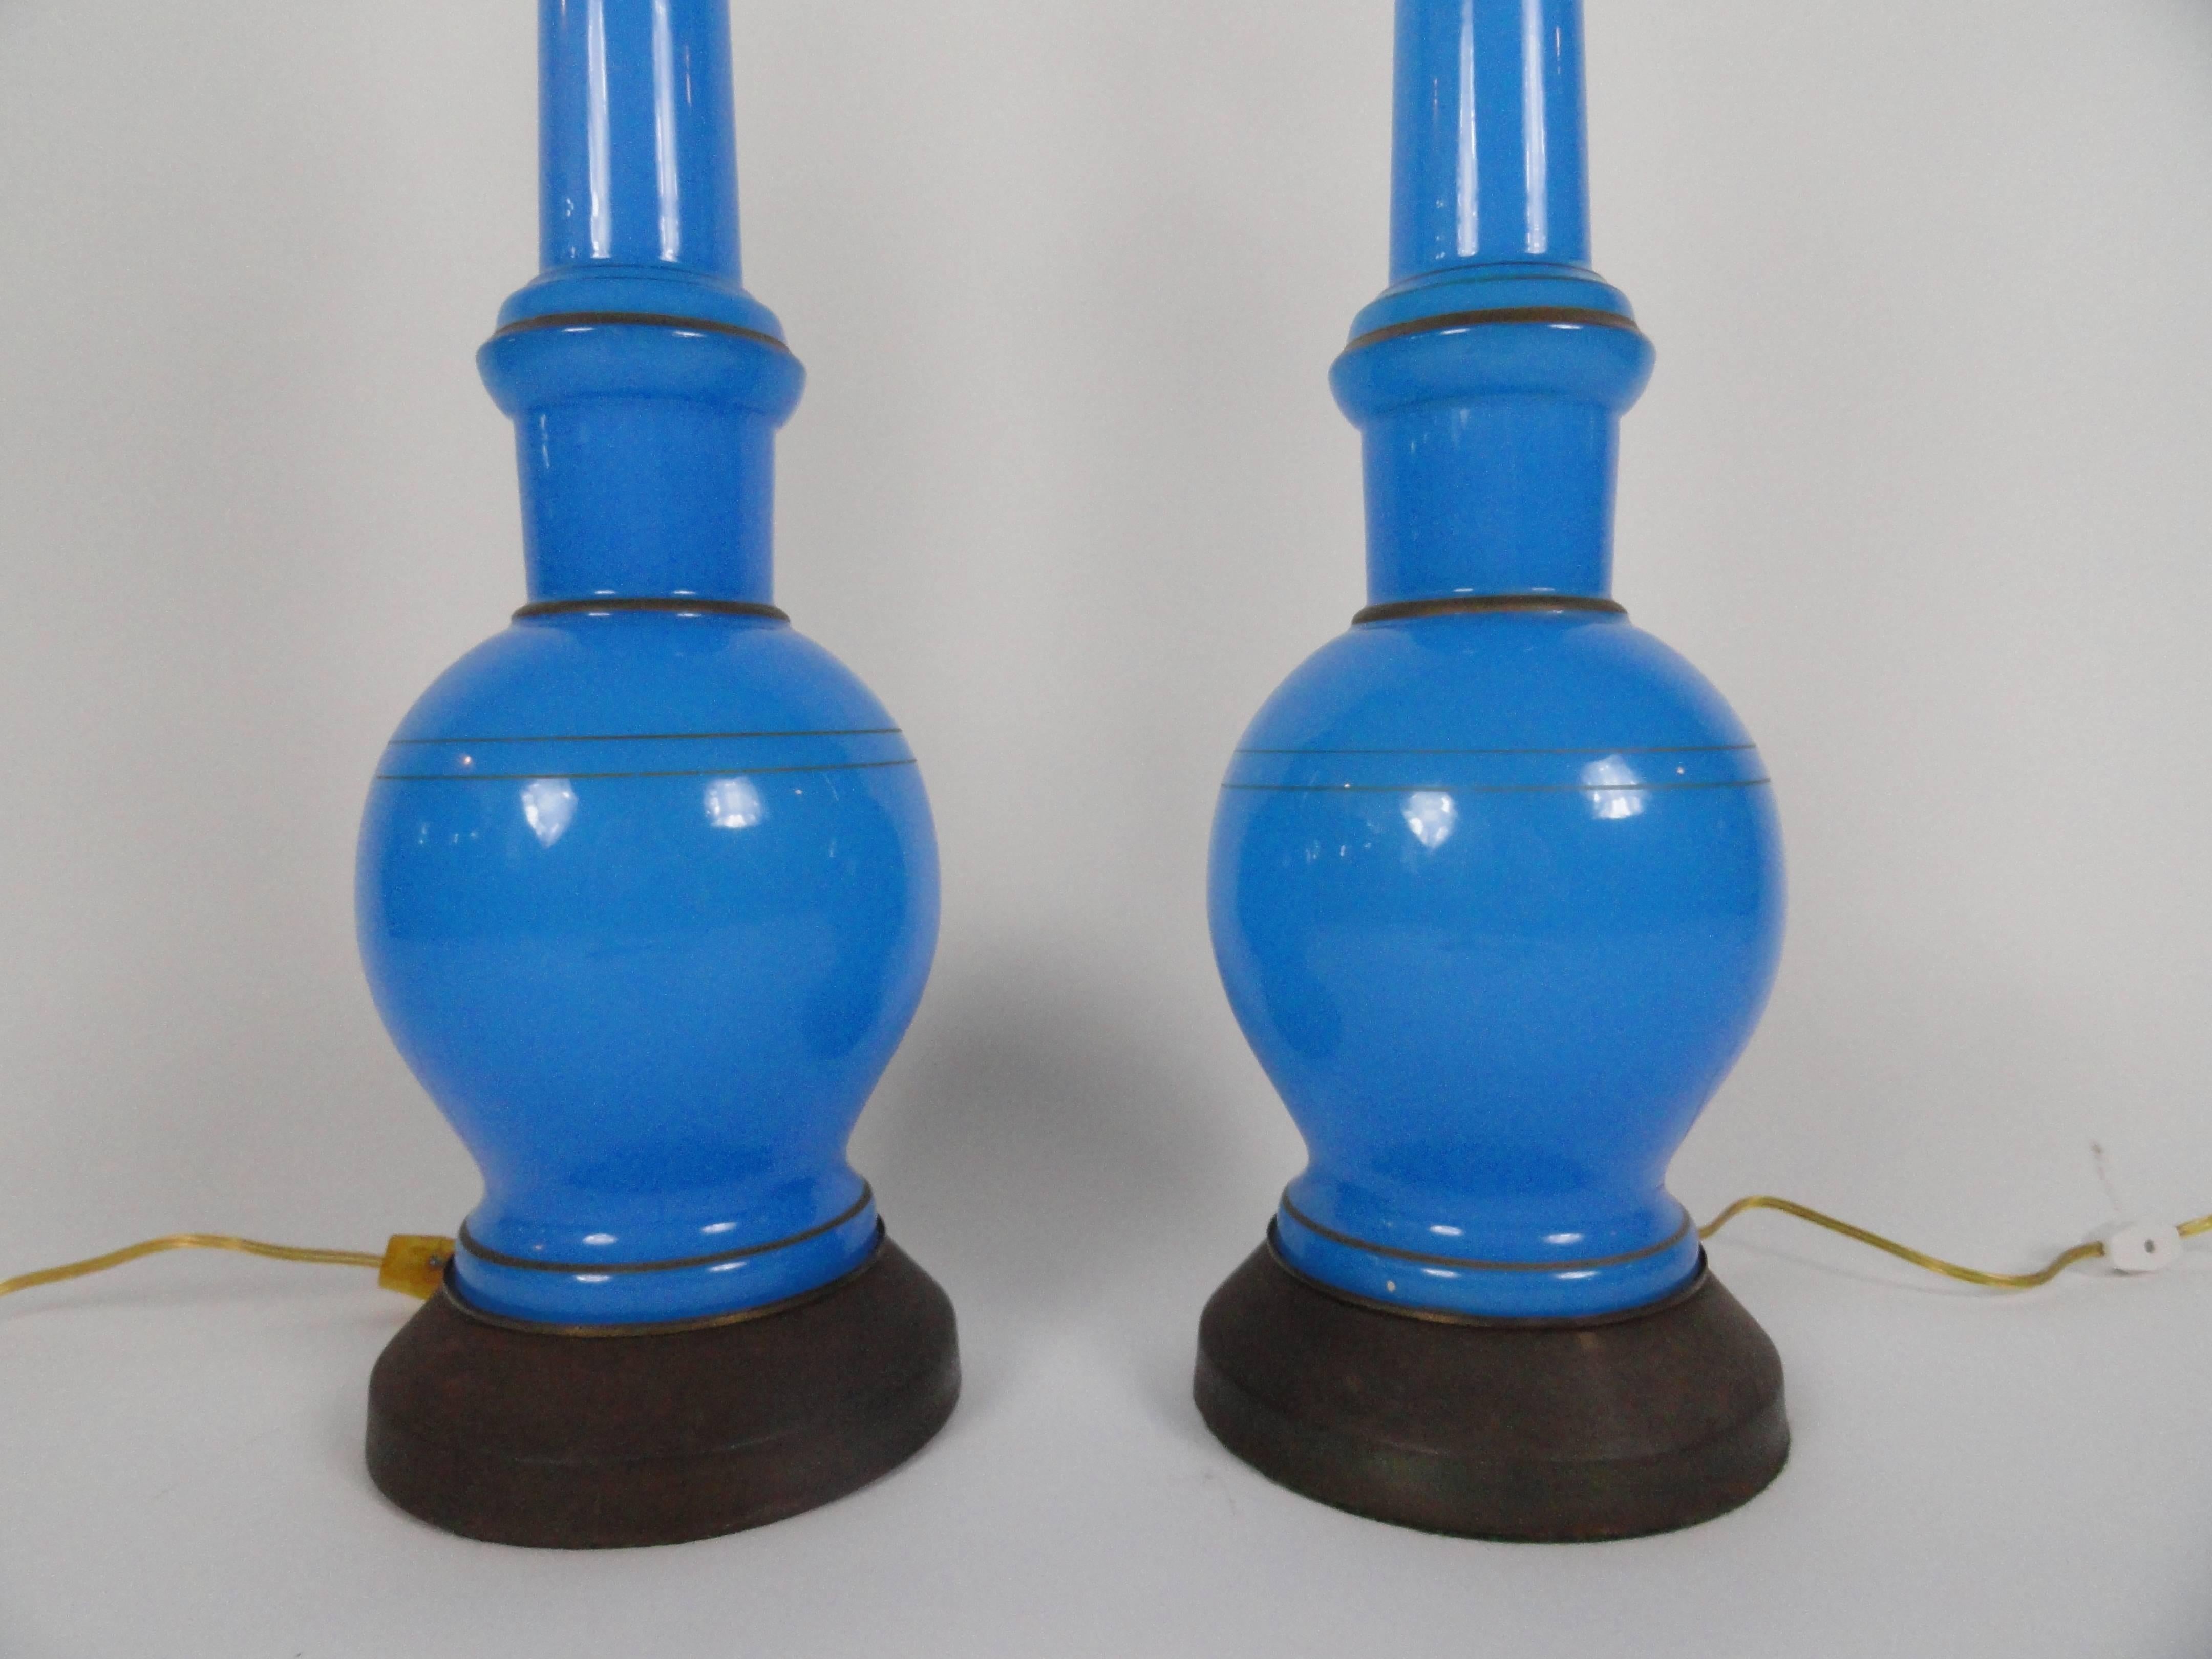 Pair of Russian blue opaline glass lamps with applied gilt decoration and brass bases. These are truly beautiful lamps with a spectacular blue color. Rewired with inline switches.